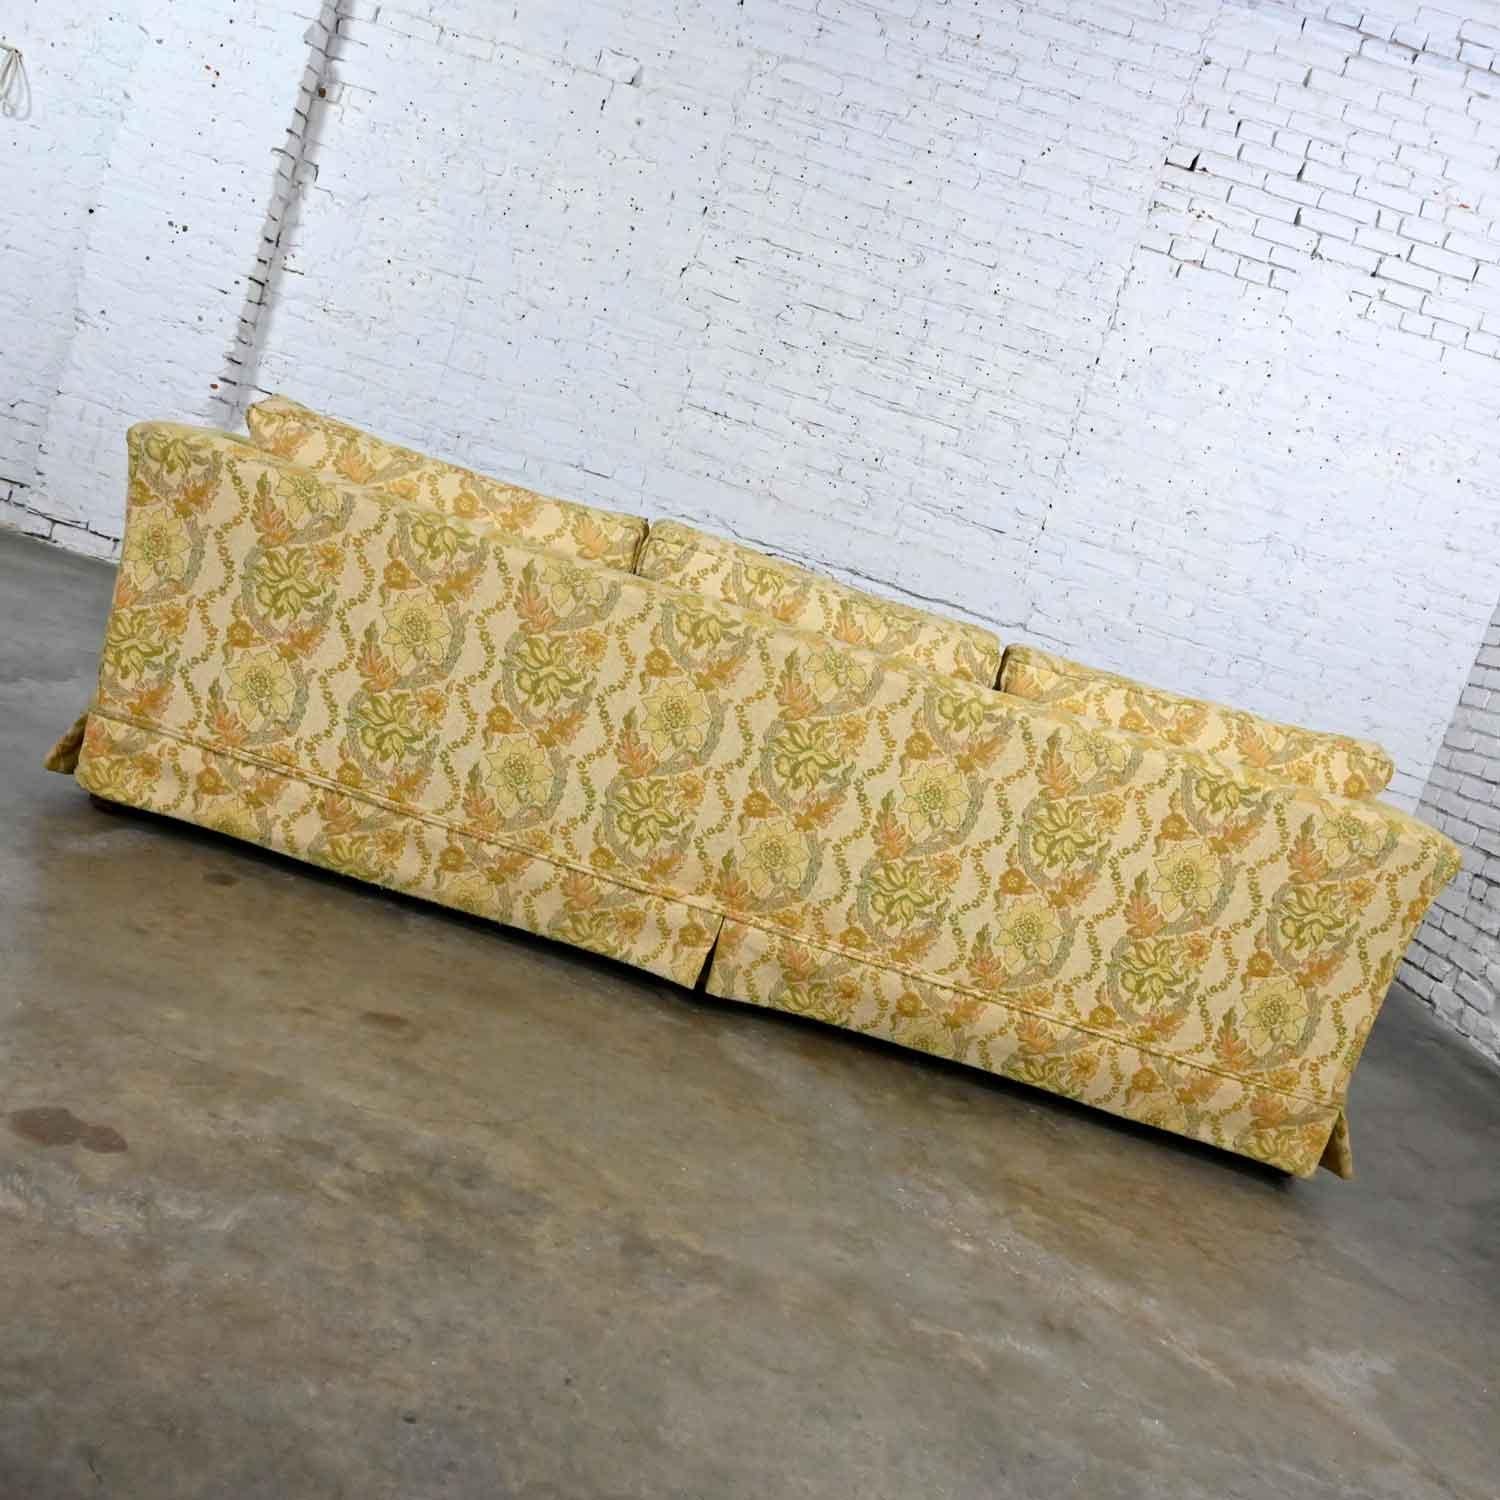 MCM Broyhill Furn Flared Tuxedo Sofa Lt Yellow Floral Fabric by Lenoir Chair Co. For Sale 2